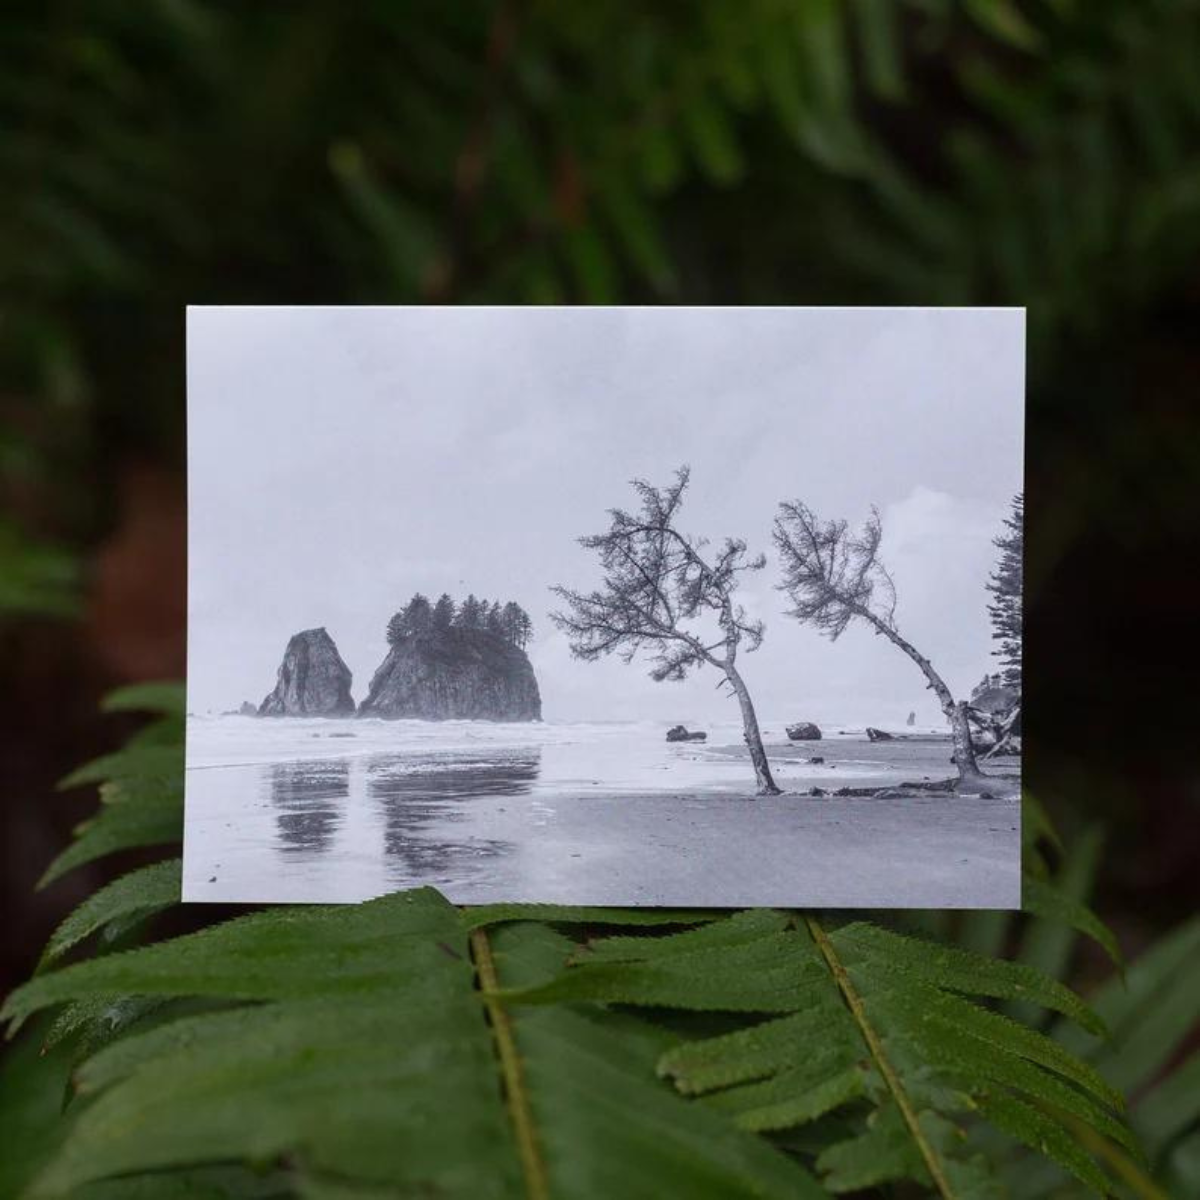 Greeting Card - La Push Beach in Washington USA by Kyle Graham-Card-Kyle Graham Photo-[made in bc]-[bc artist]-[bc nature photographer]-All The Good Things From BC